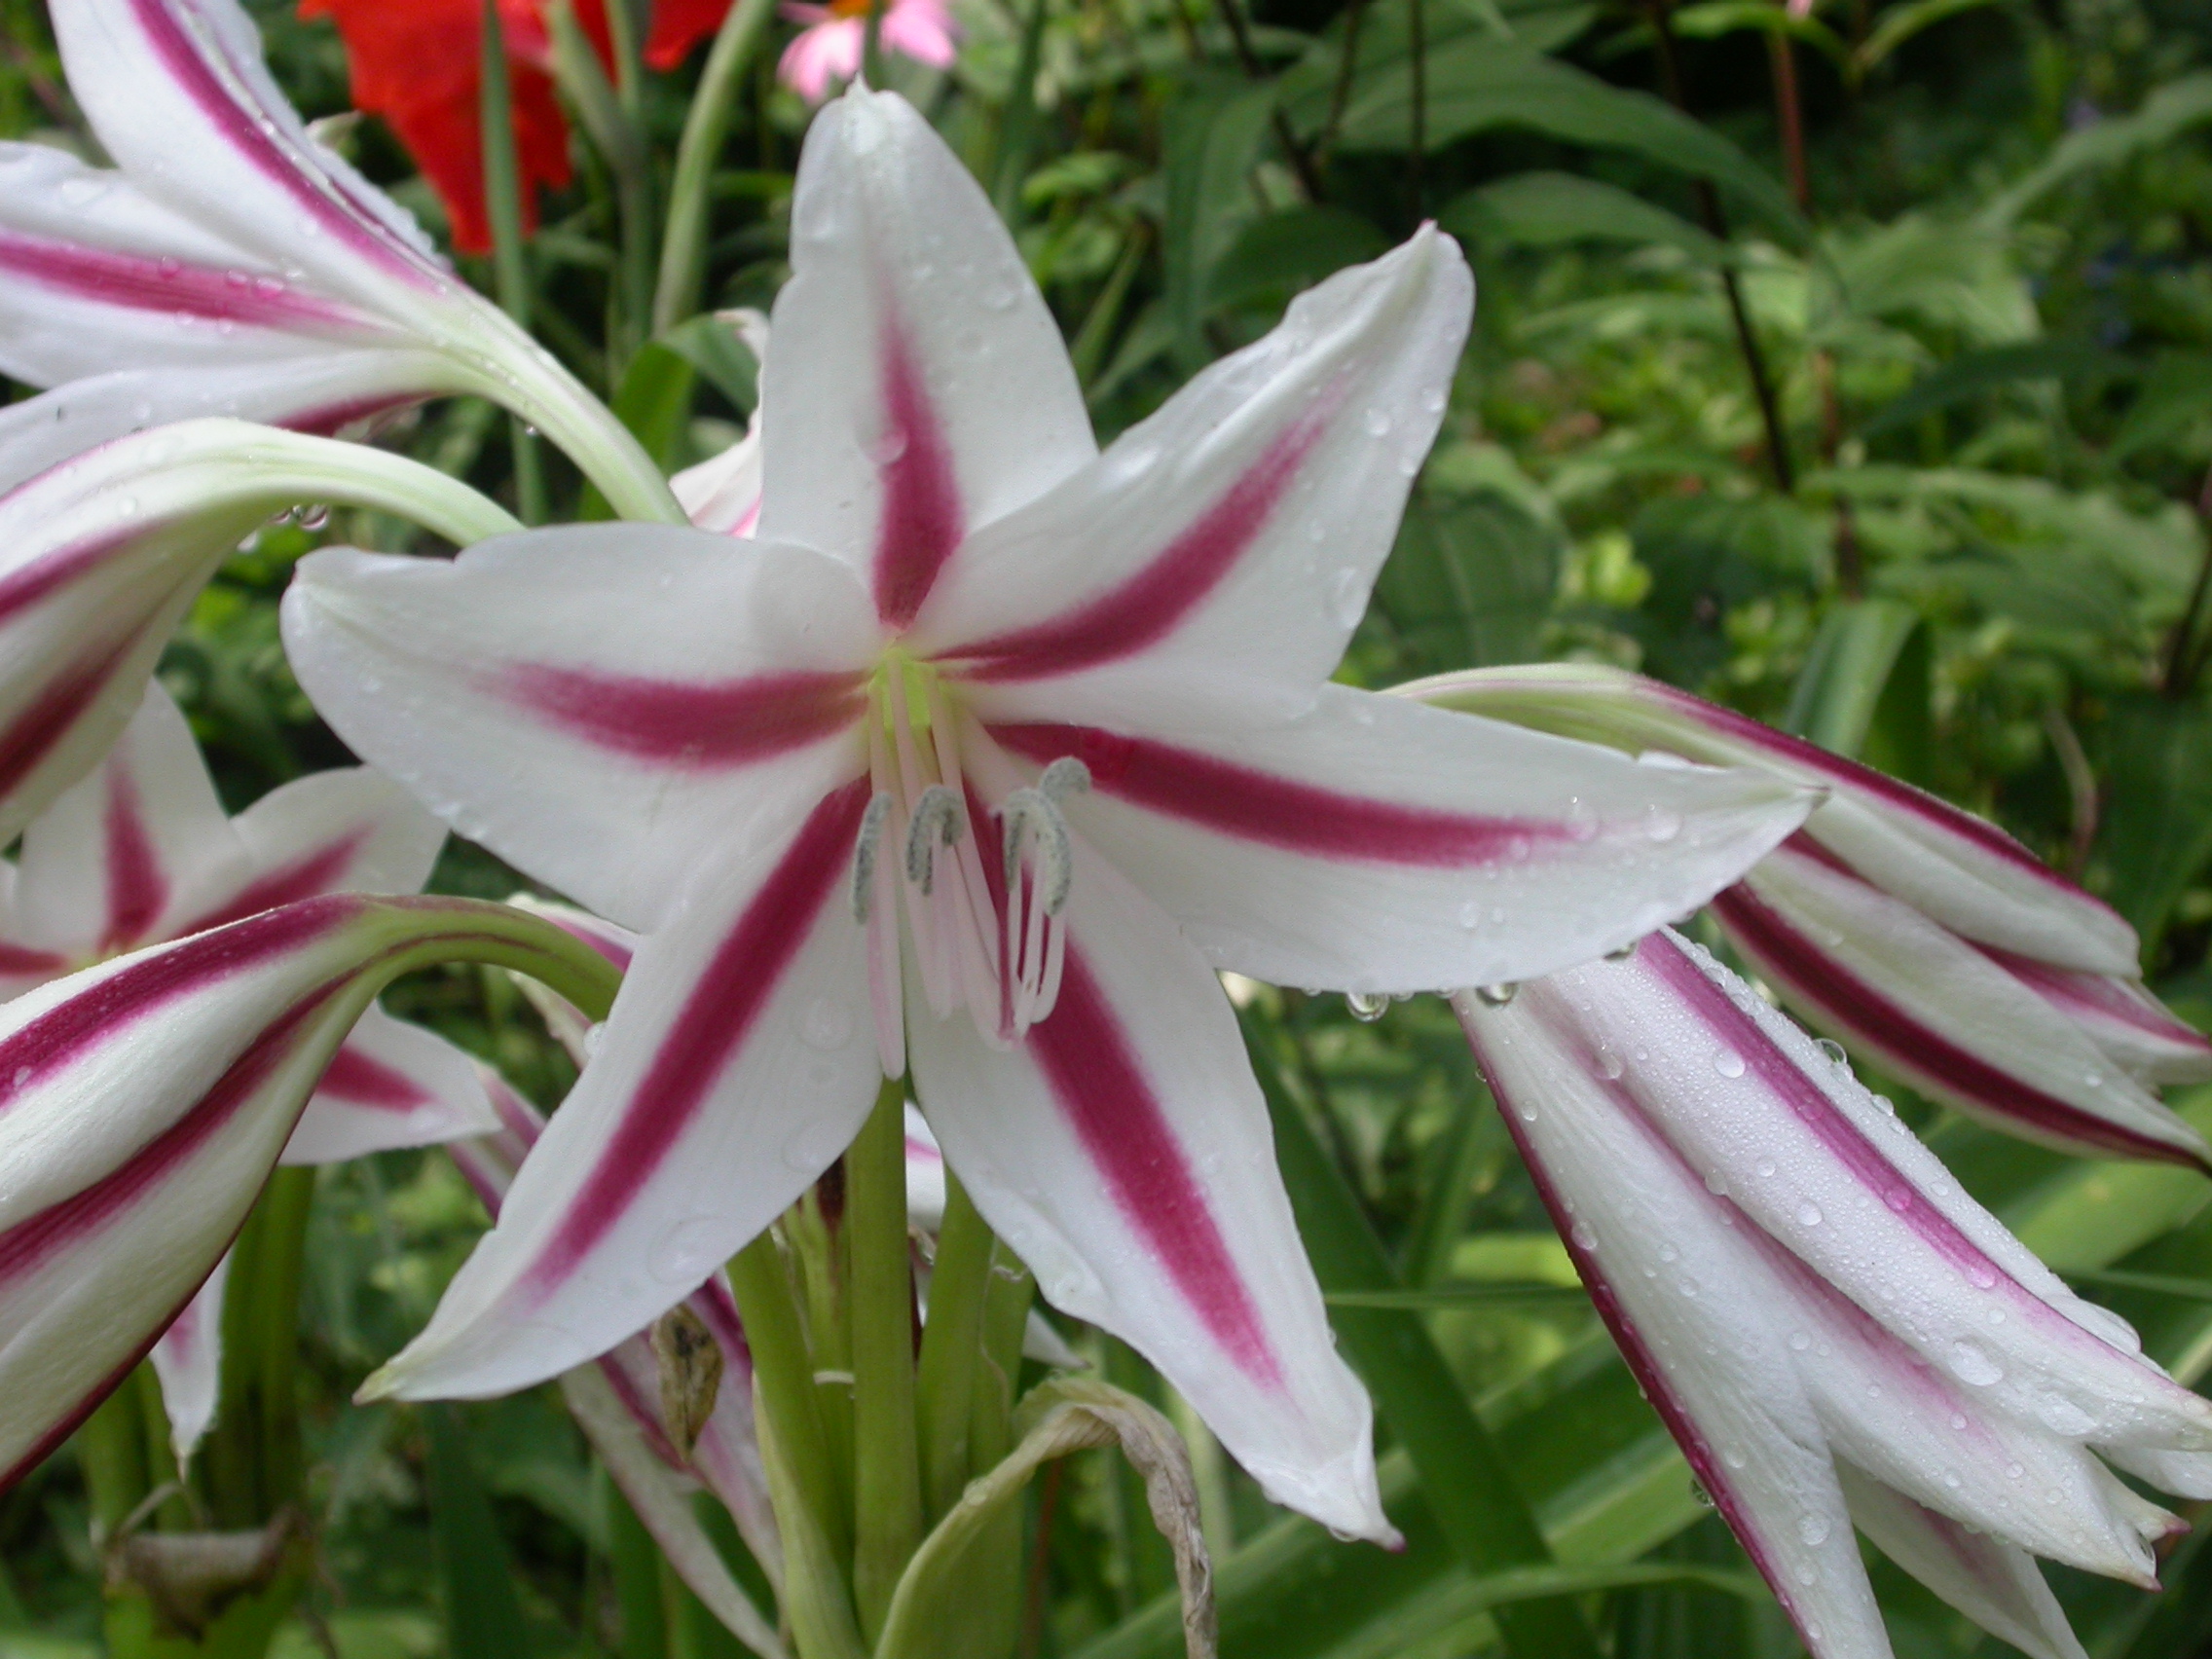 Heirloom Lilies Provide Living Link With History | Tallahassee.com ...